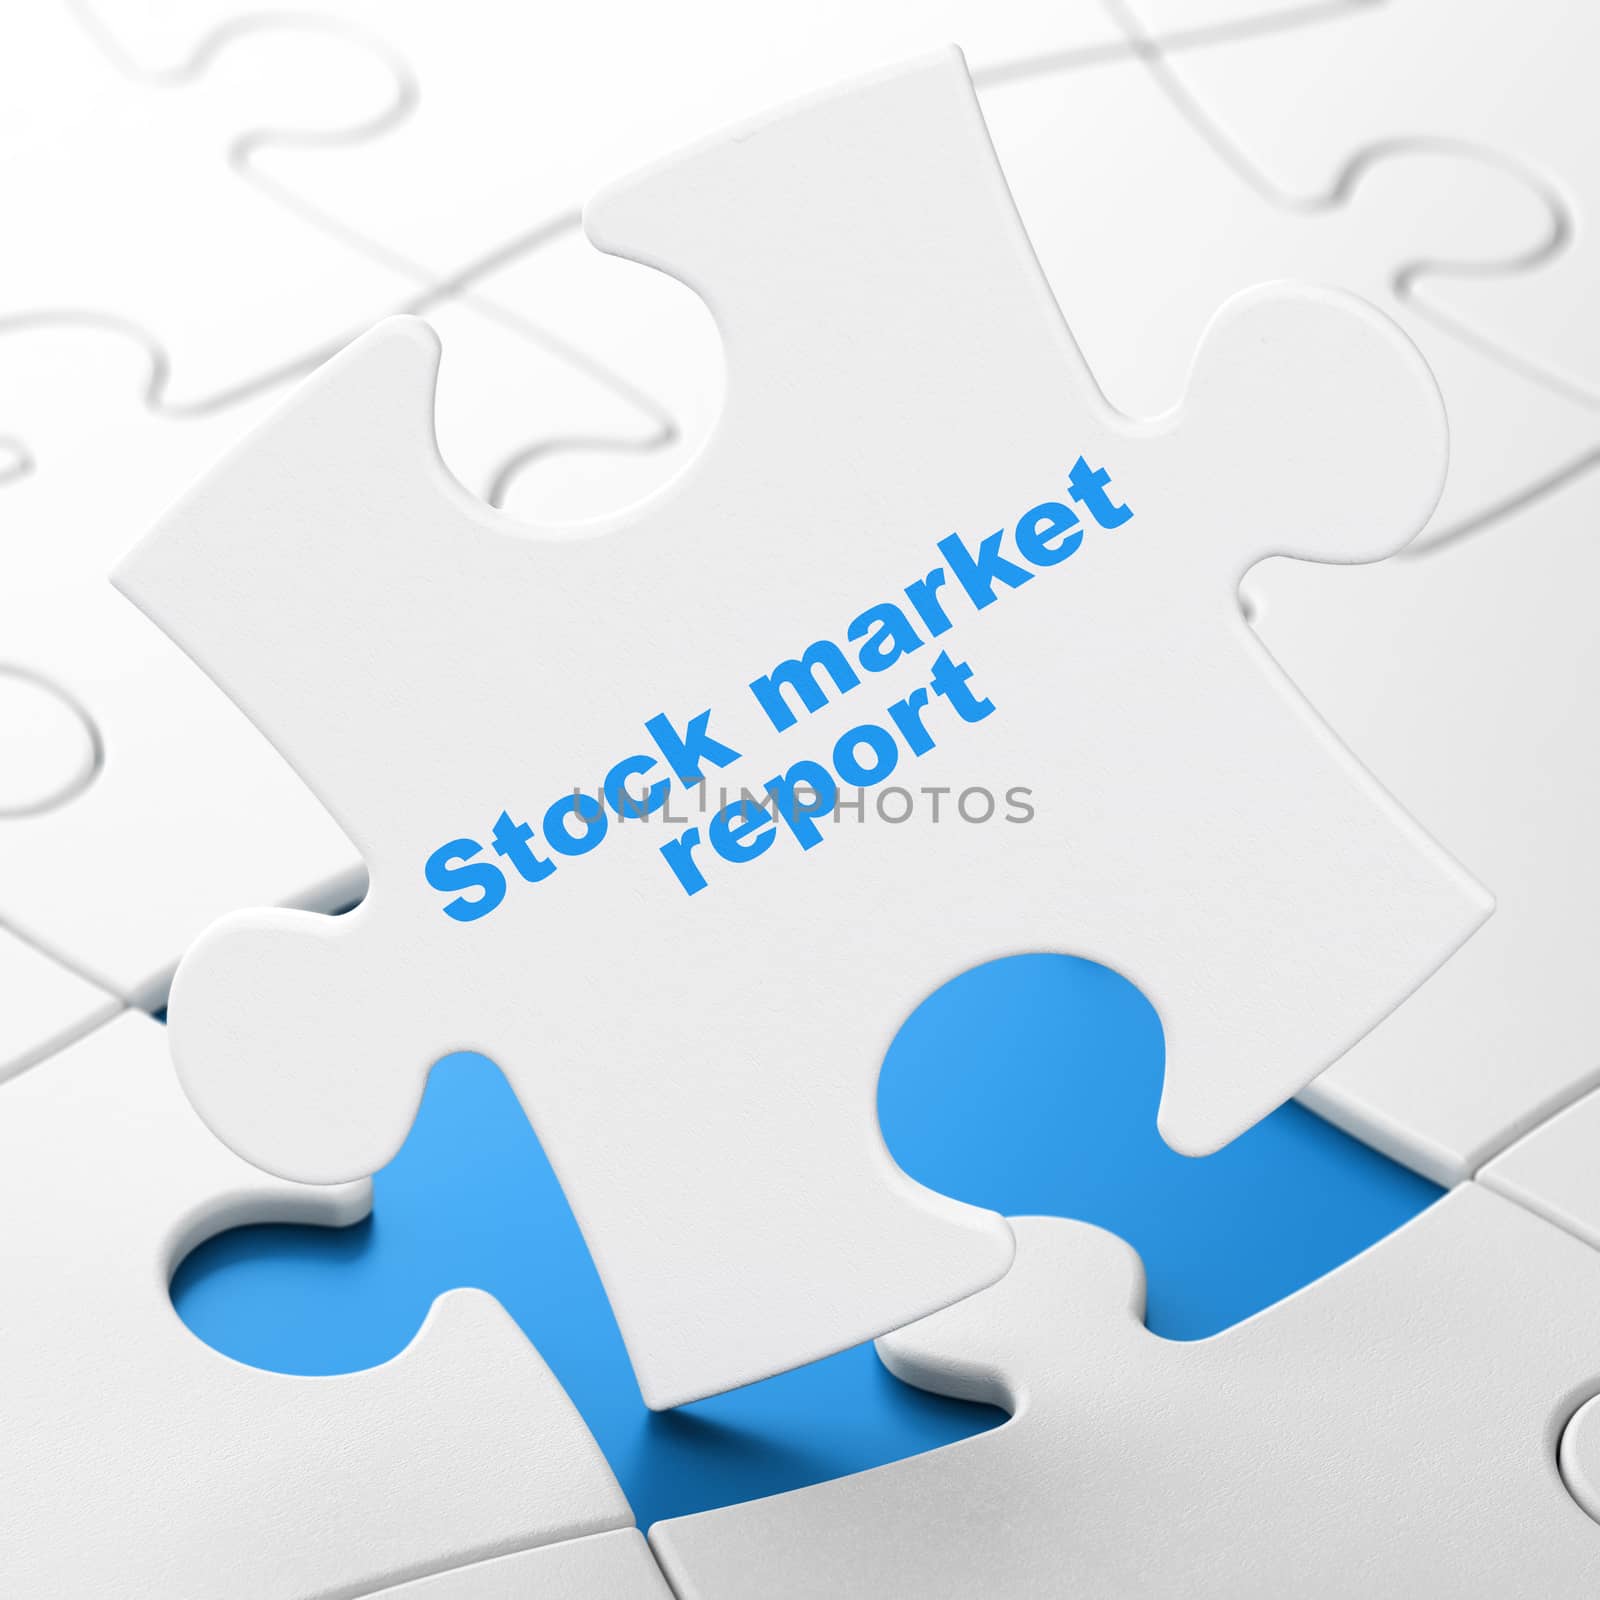 Banking concept: Stock Market Report on White puzzle pieces background, 3D rendering